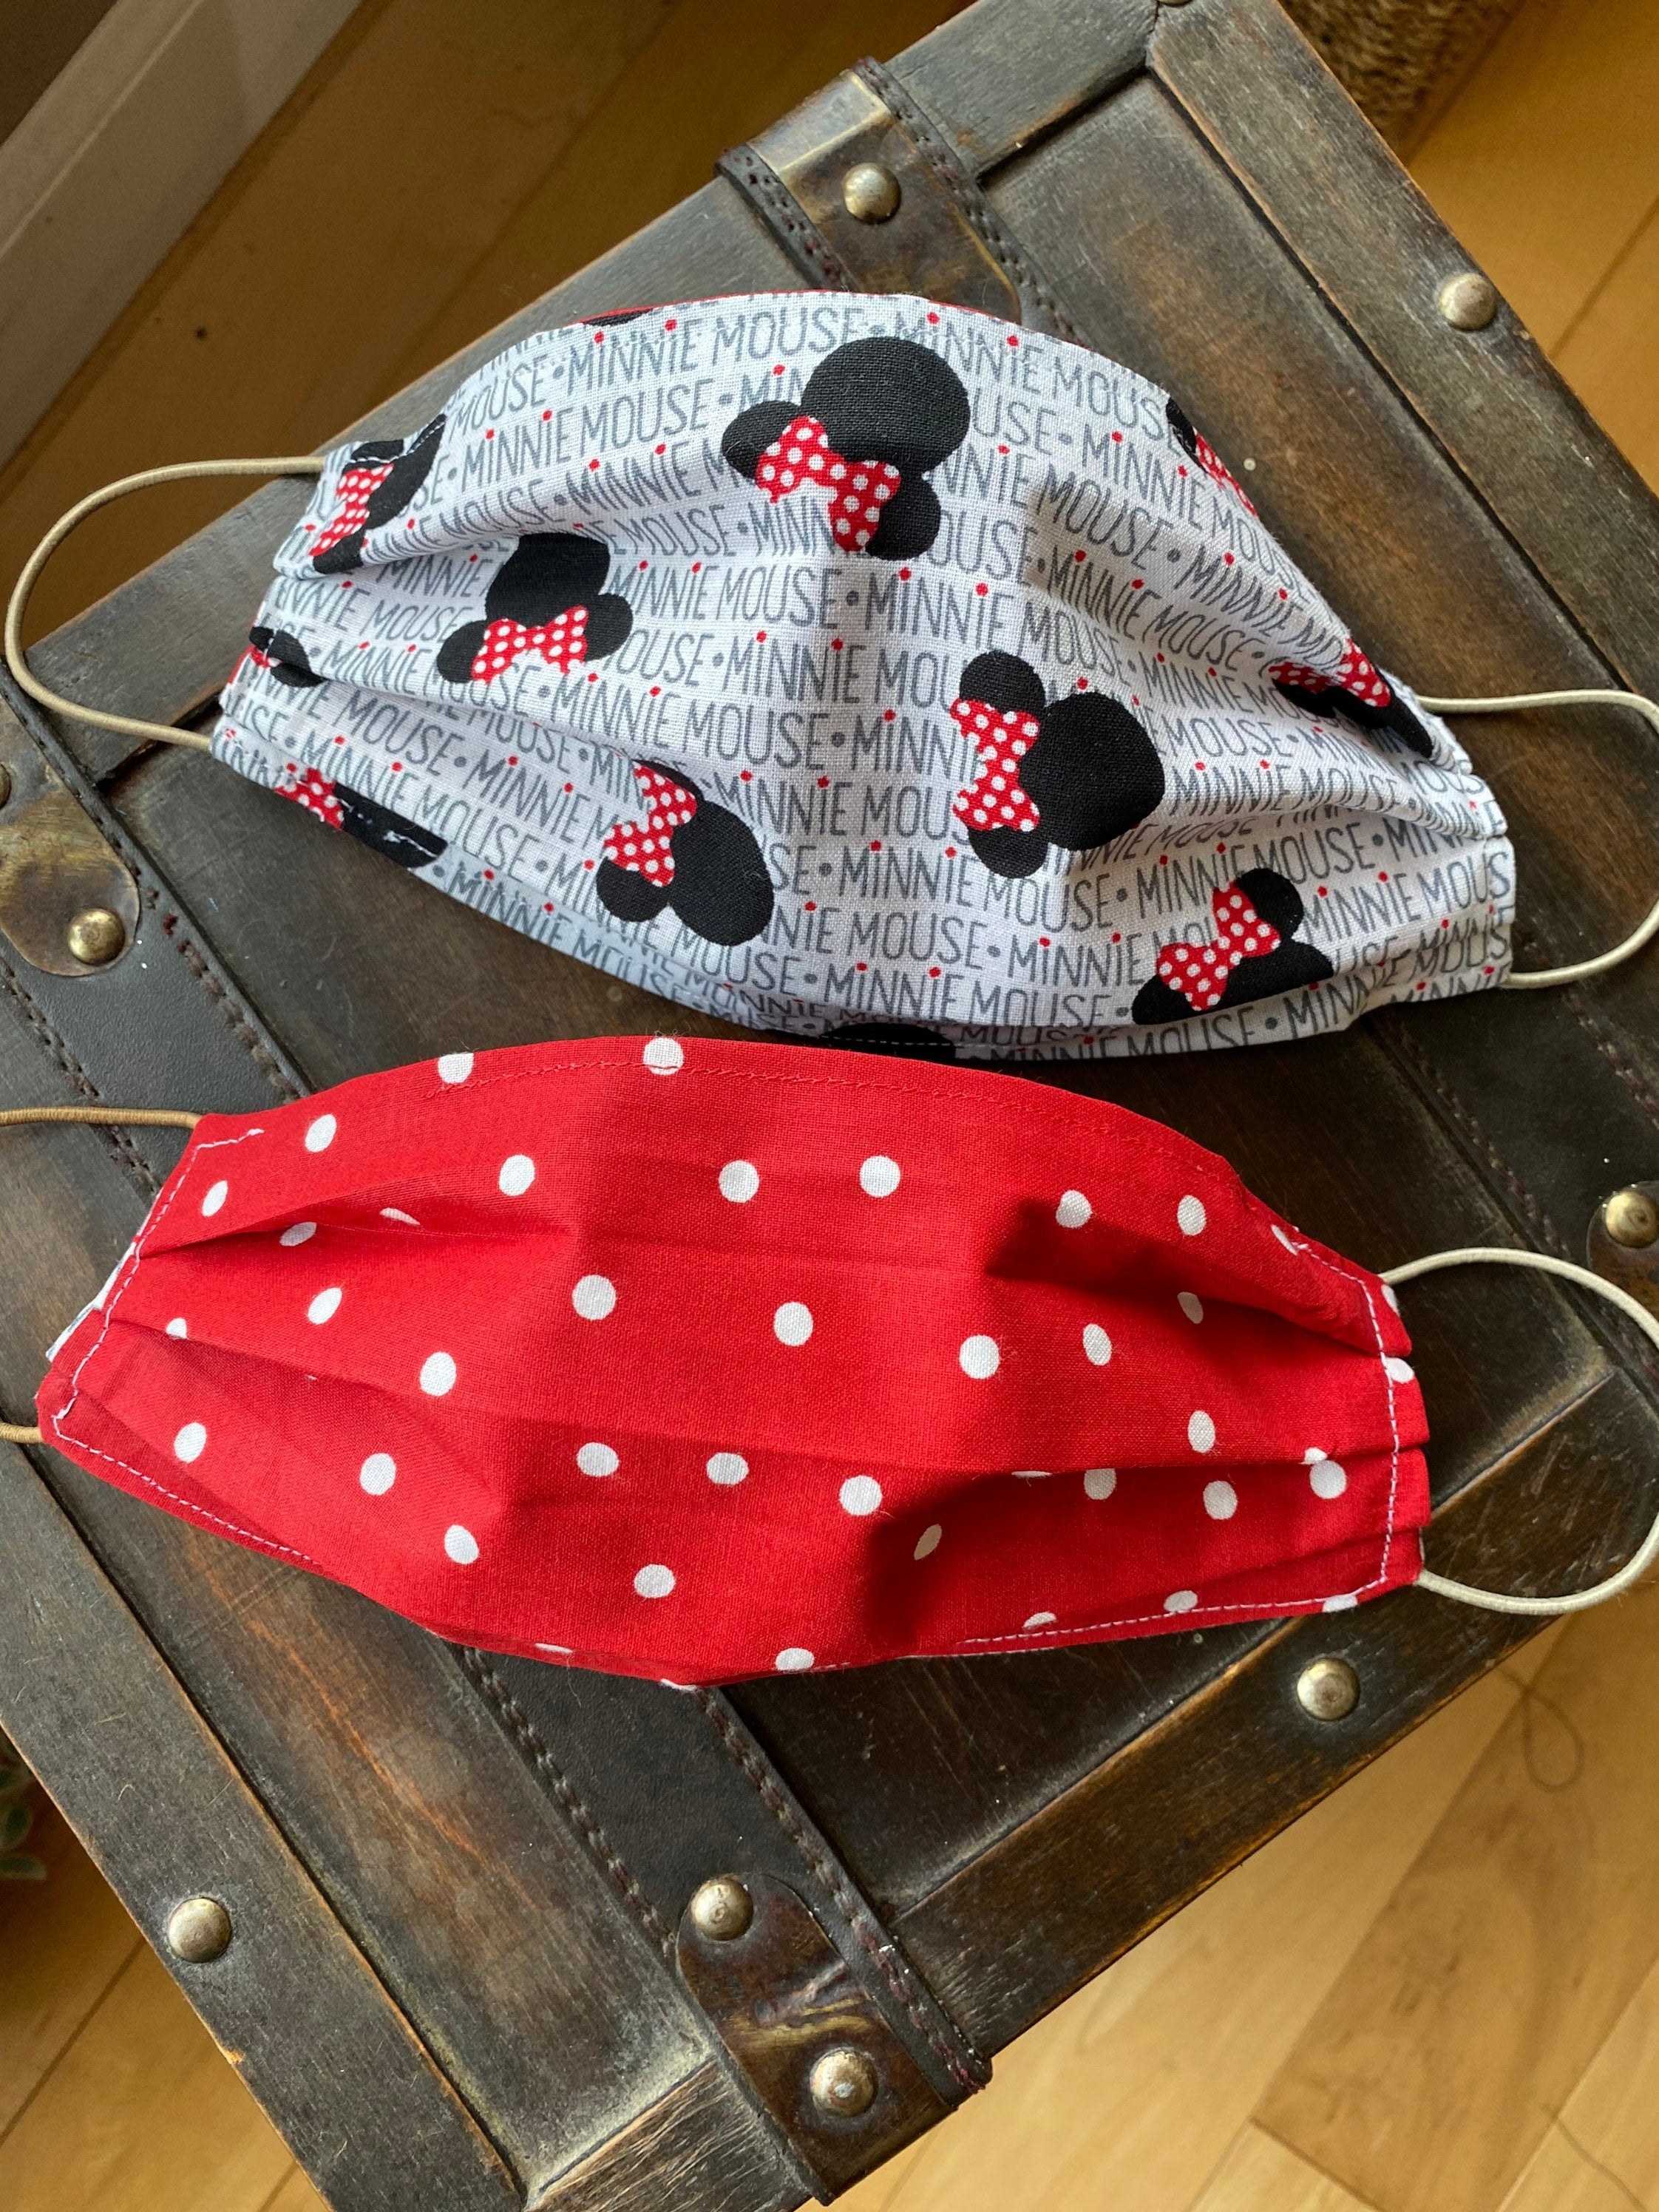 a red mask with white polka dots that reverses into a grey white mask with minnie mouse icons and the written words &quot;minnie mouse&quot; all over it in a pattern